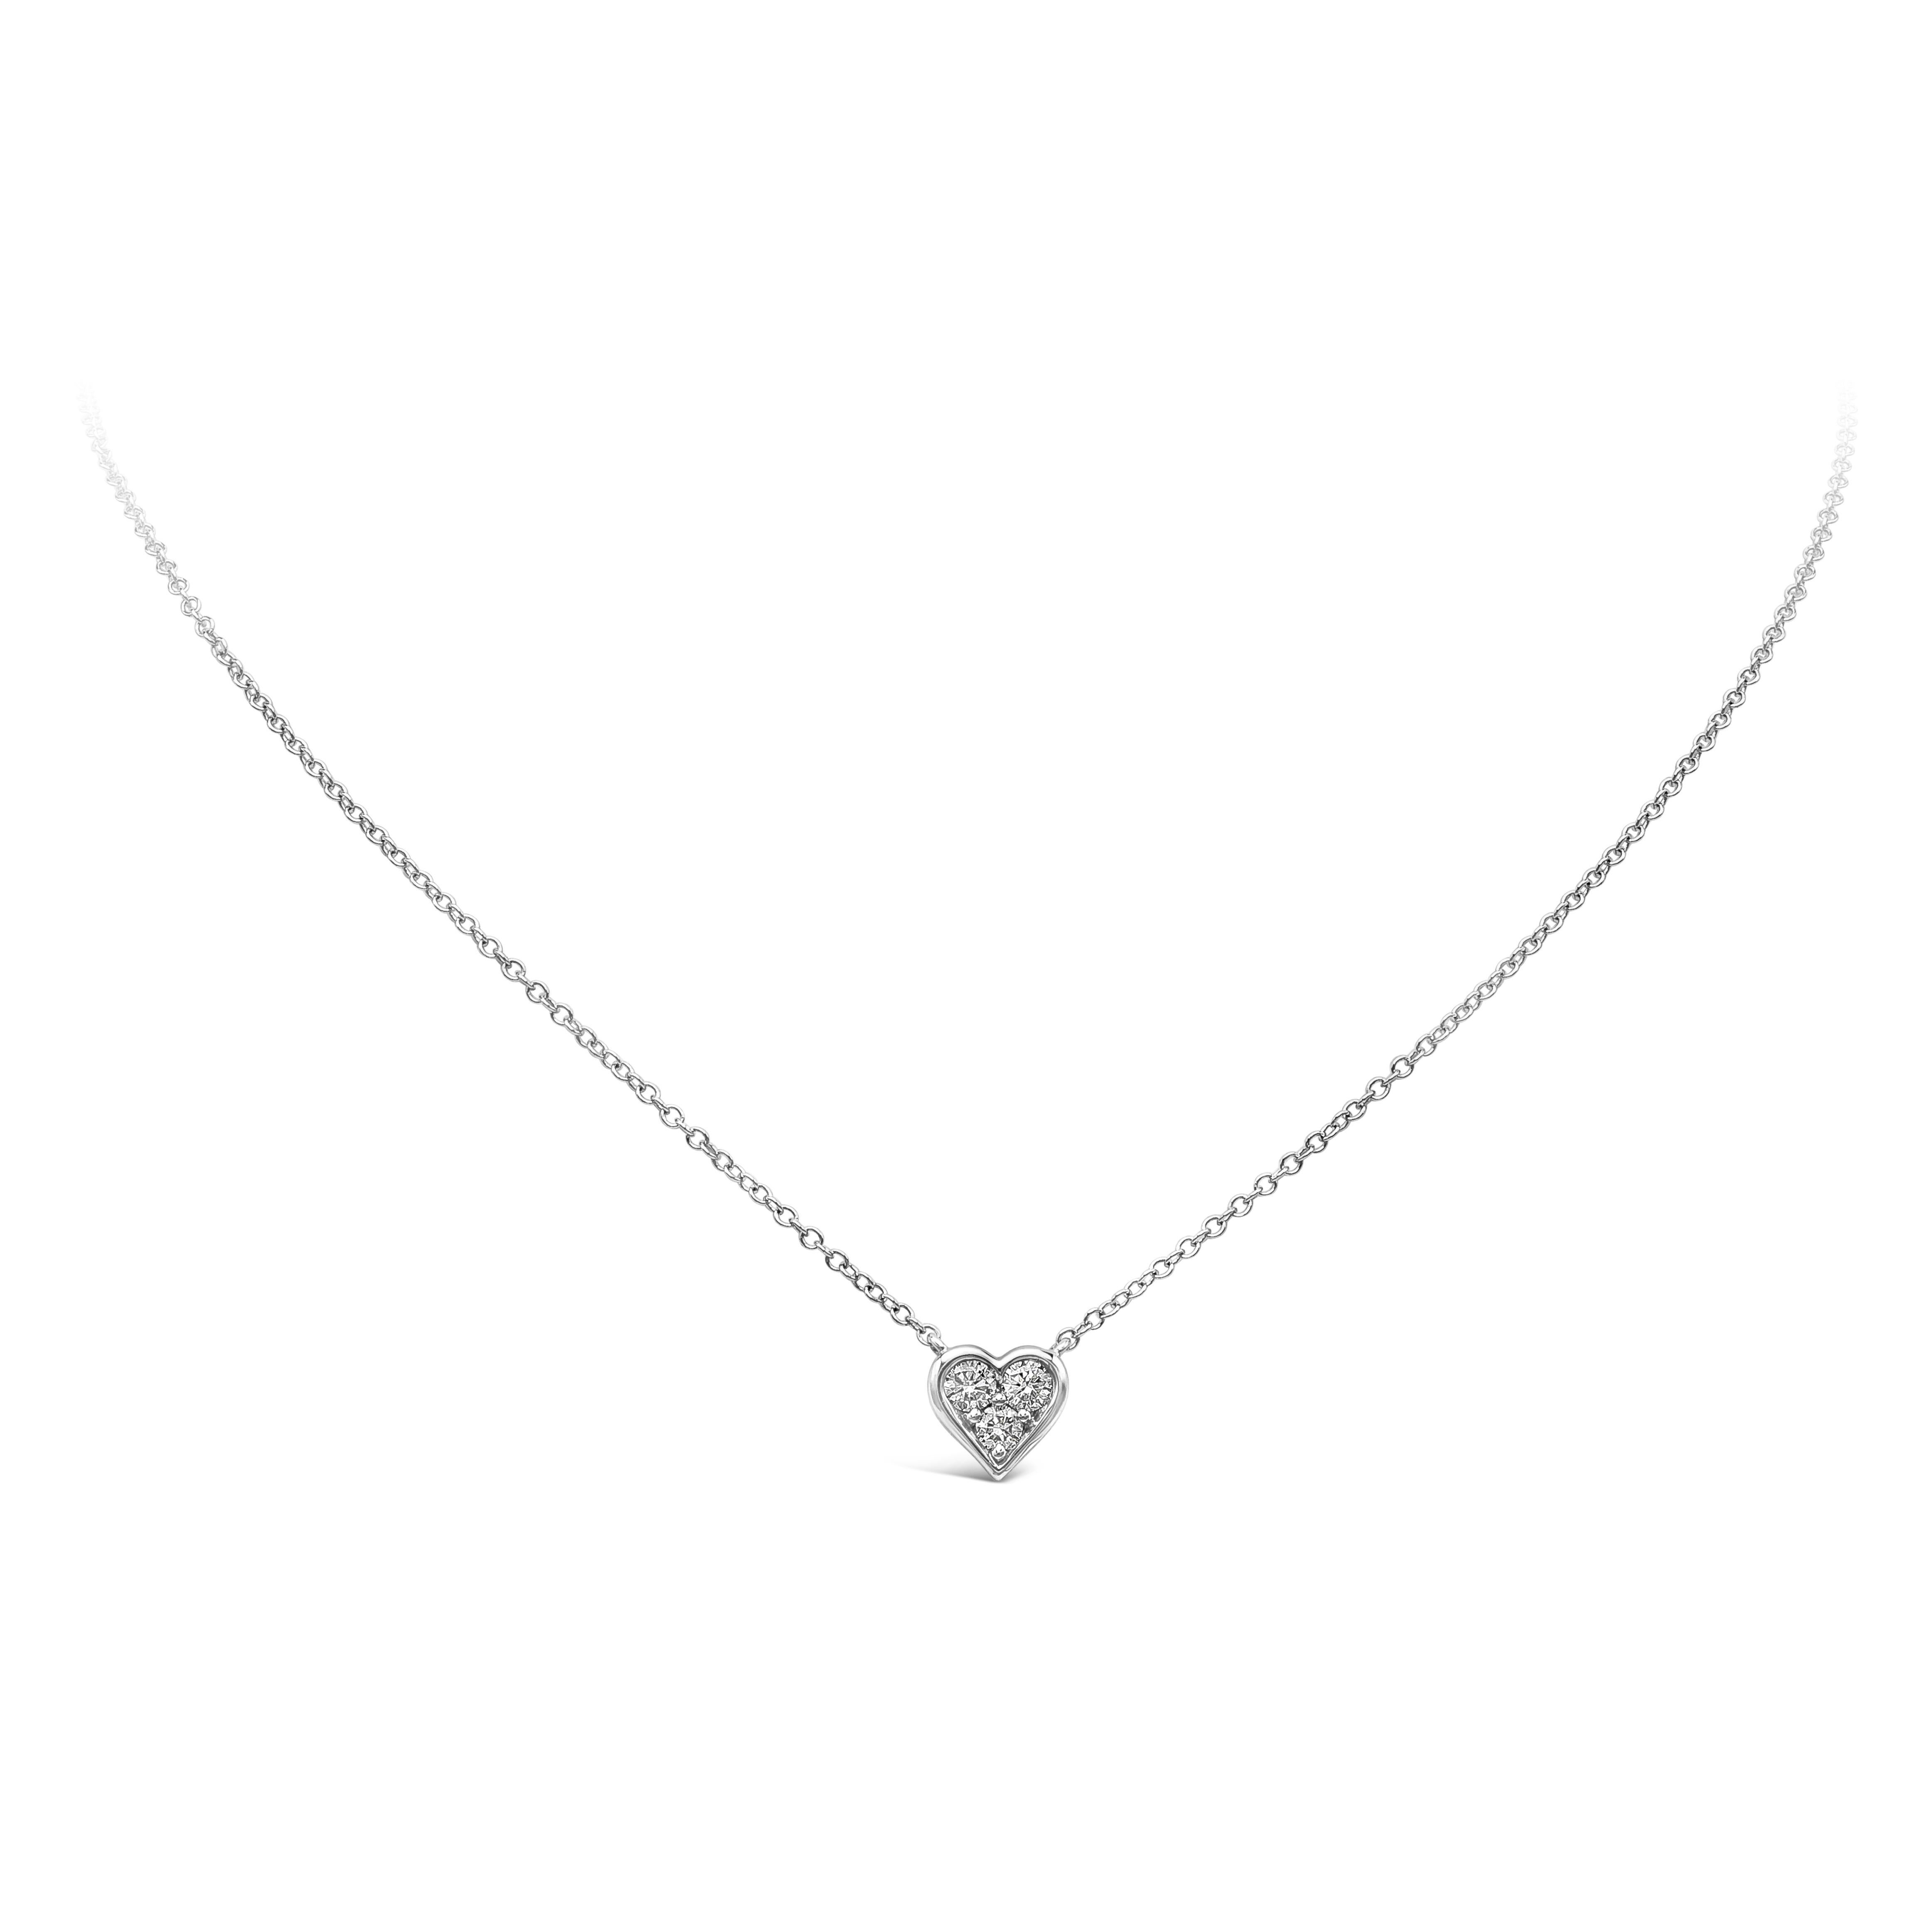 A simple pendant necklace showcasing 3 round brilliant diamonds weighing 0.28 carats total, set in a chic heart shape design and suspended on an 18 inches adjustable chain. Finely made in 18k white gold.

Style available in different price ranges.